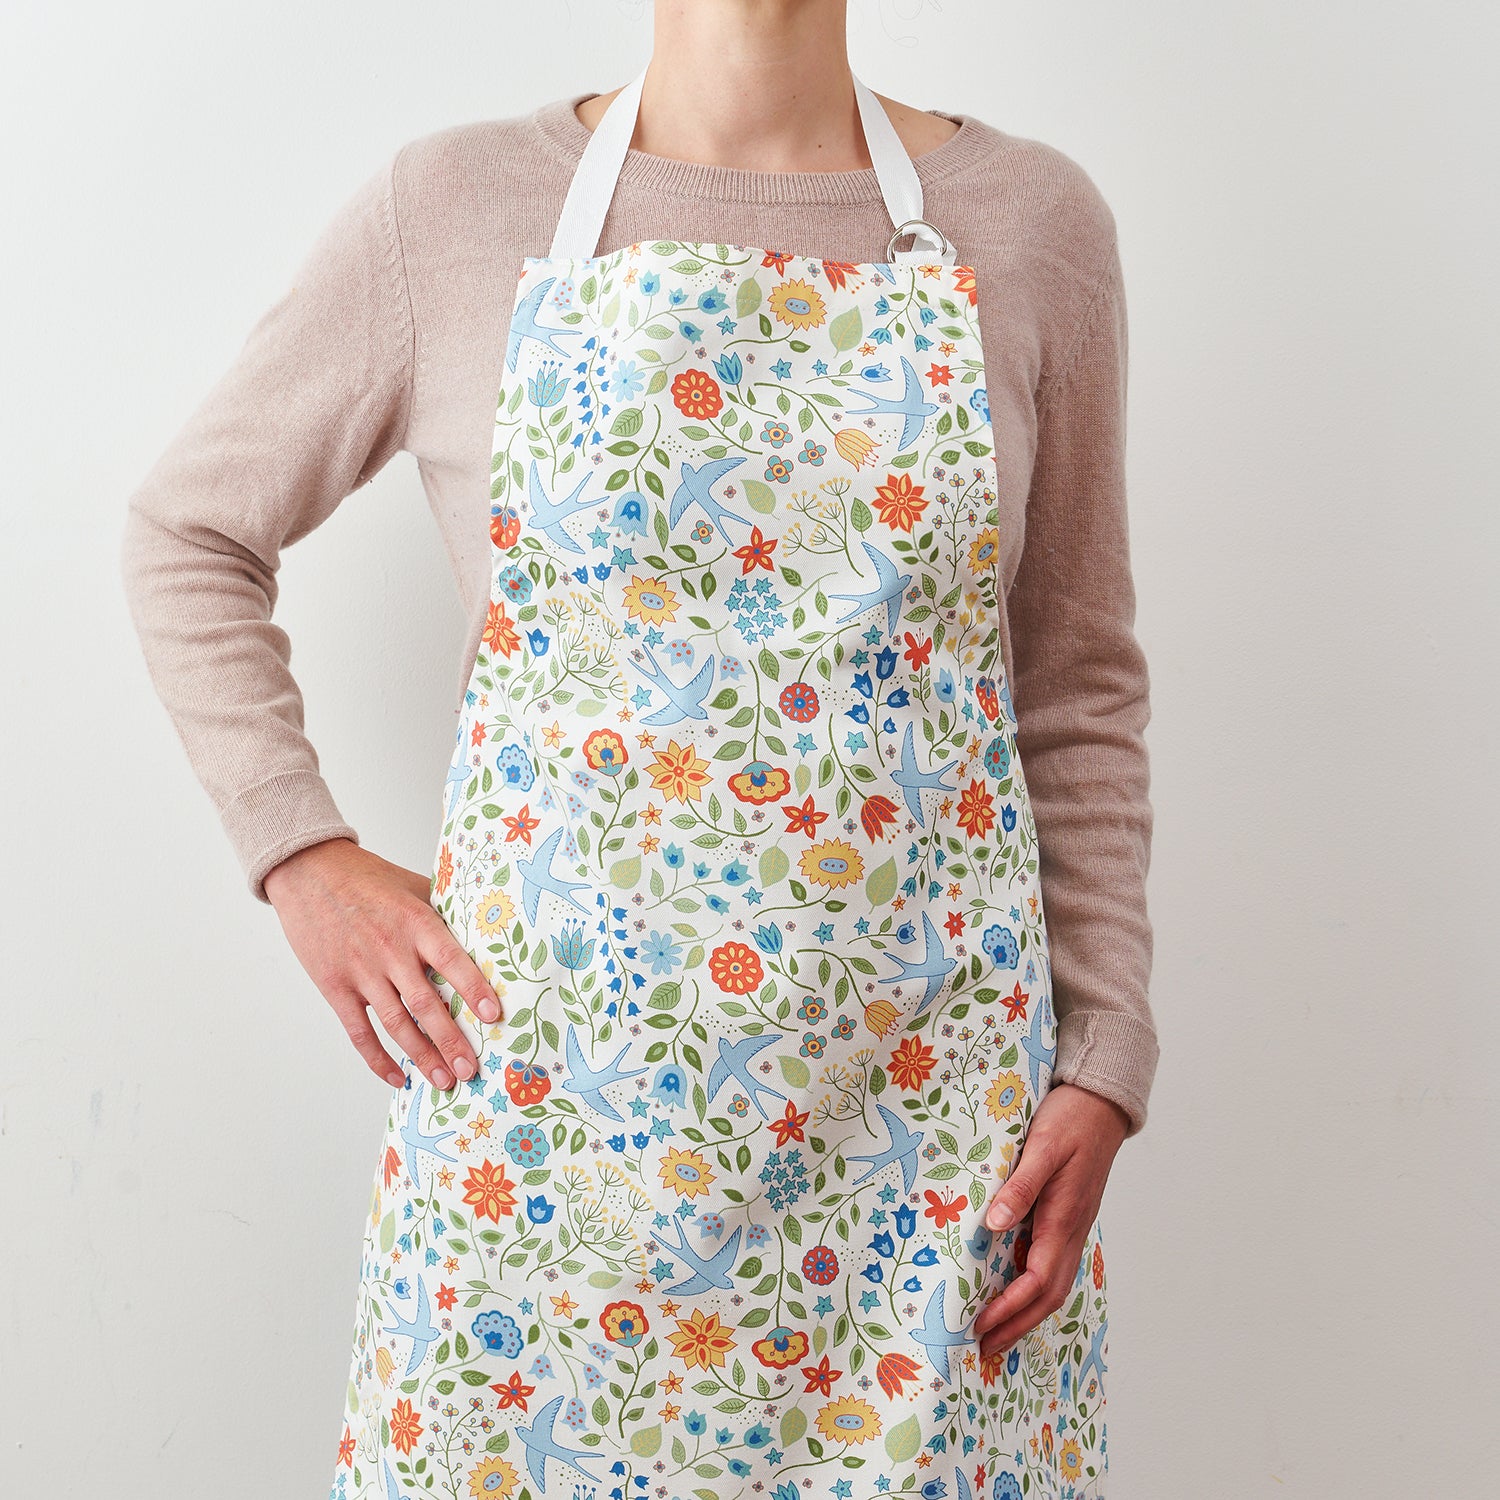 Summer Swallows Apron by Mary Kilvert